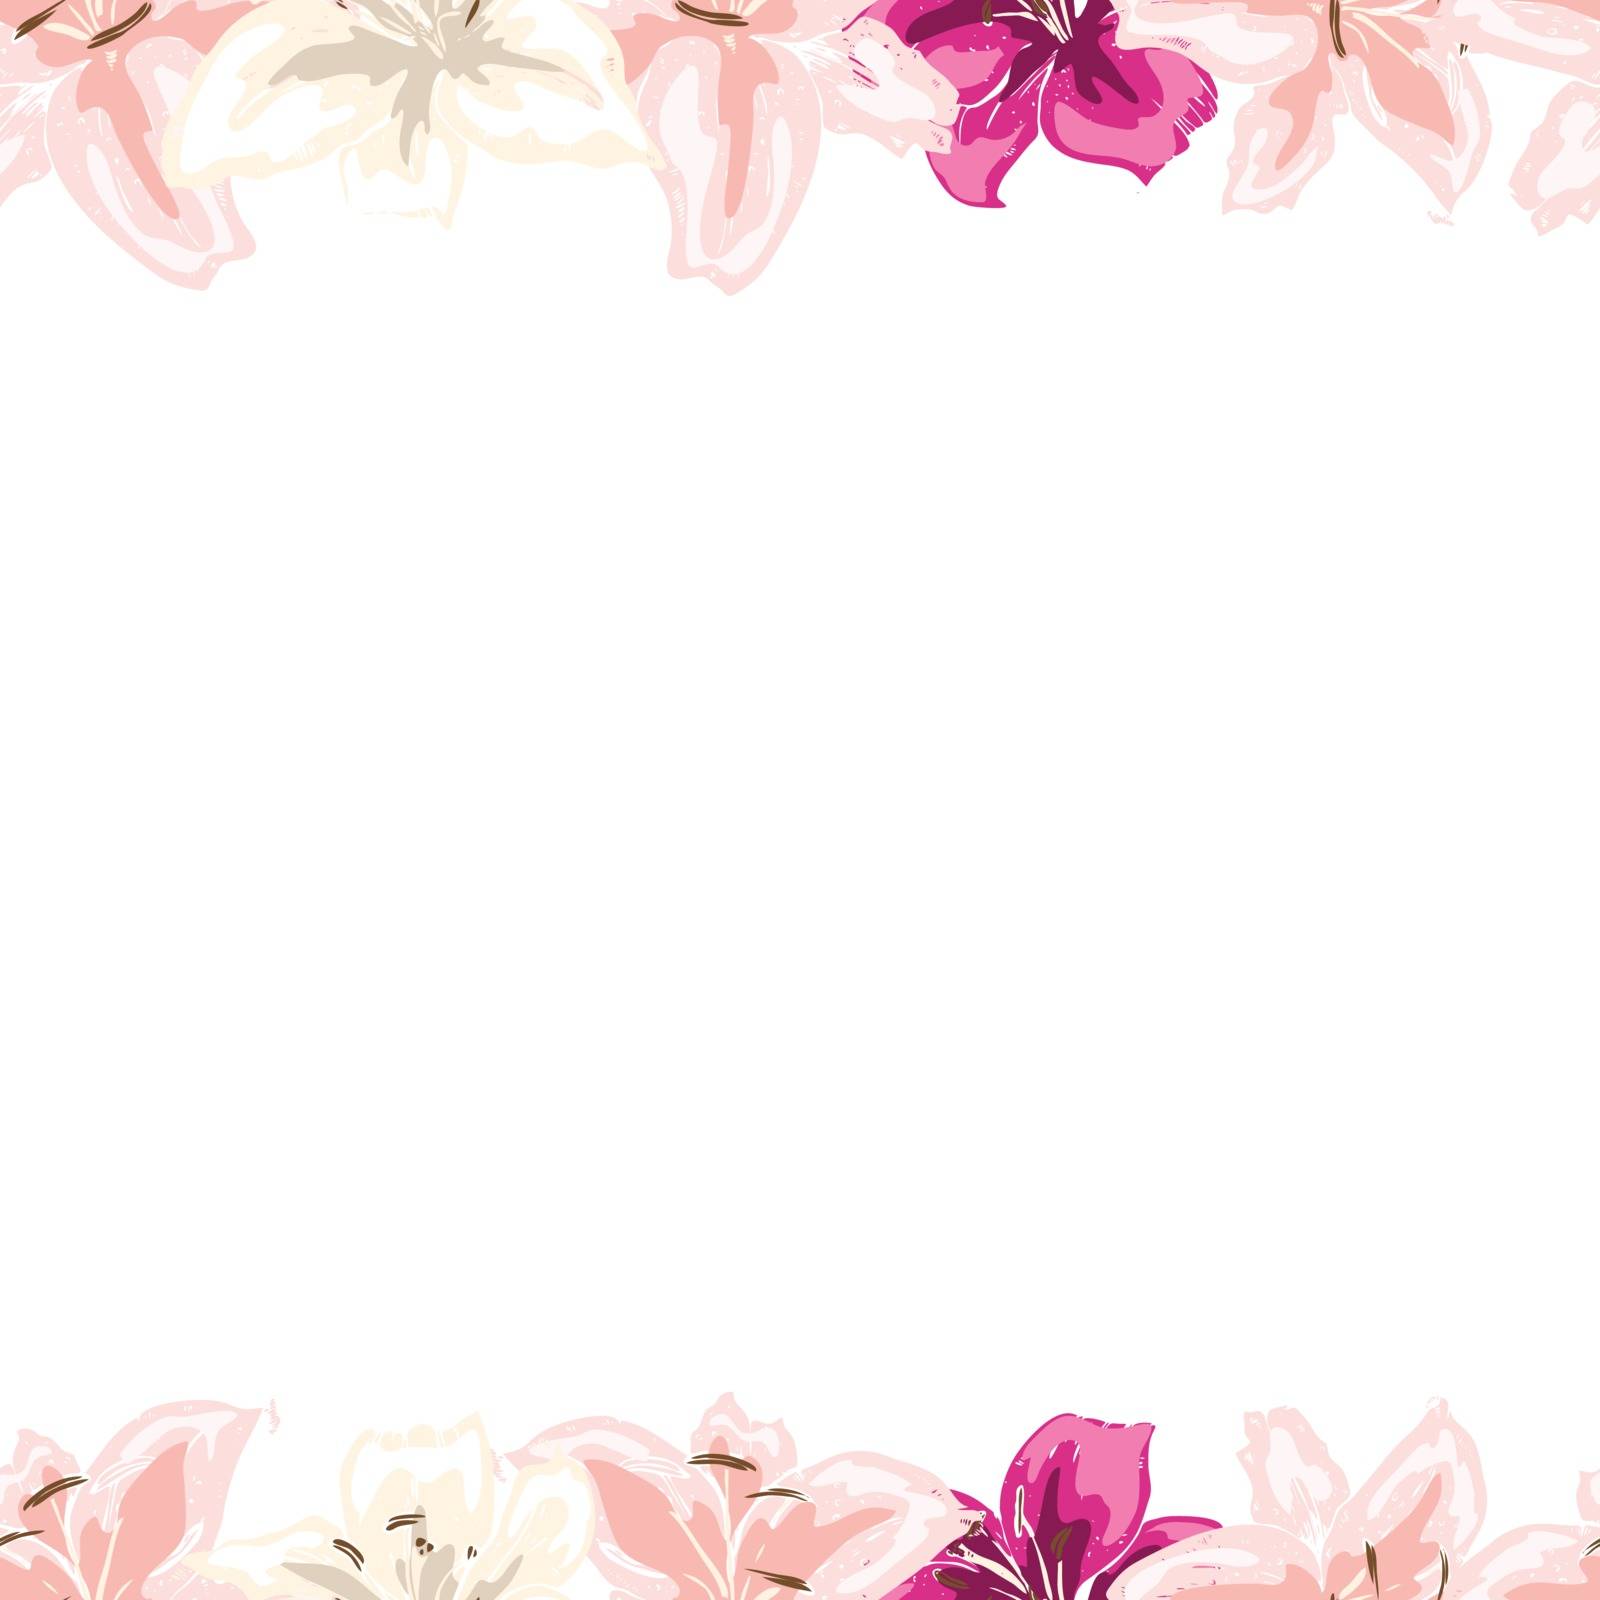 Floral frame of gently pink lilies flowers isolated on white background. Vector illustration. by nutela_pancake